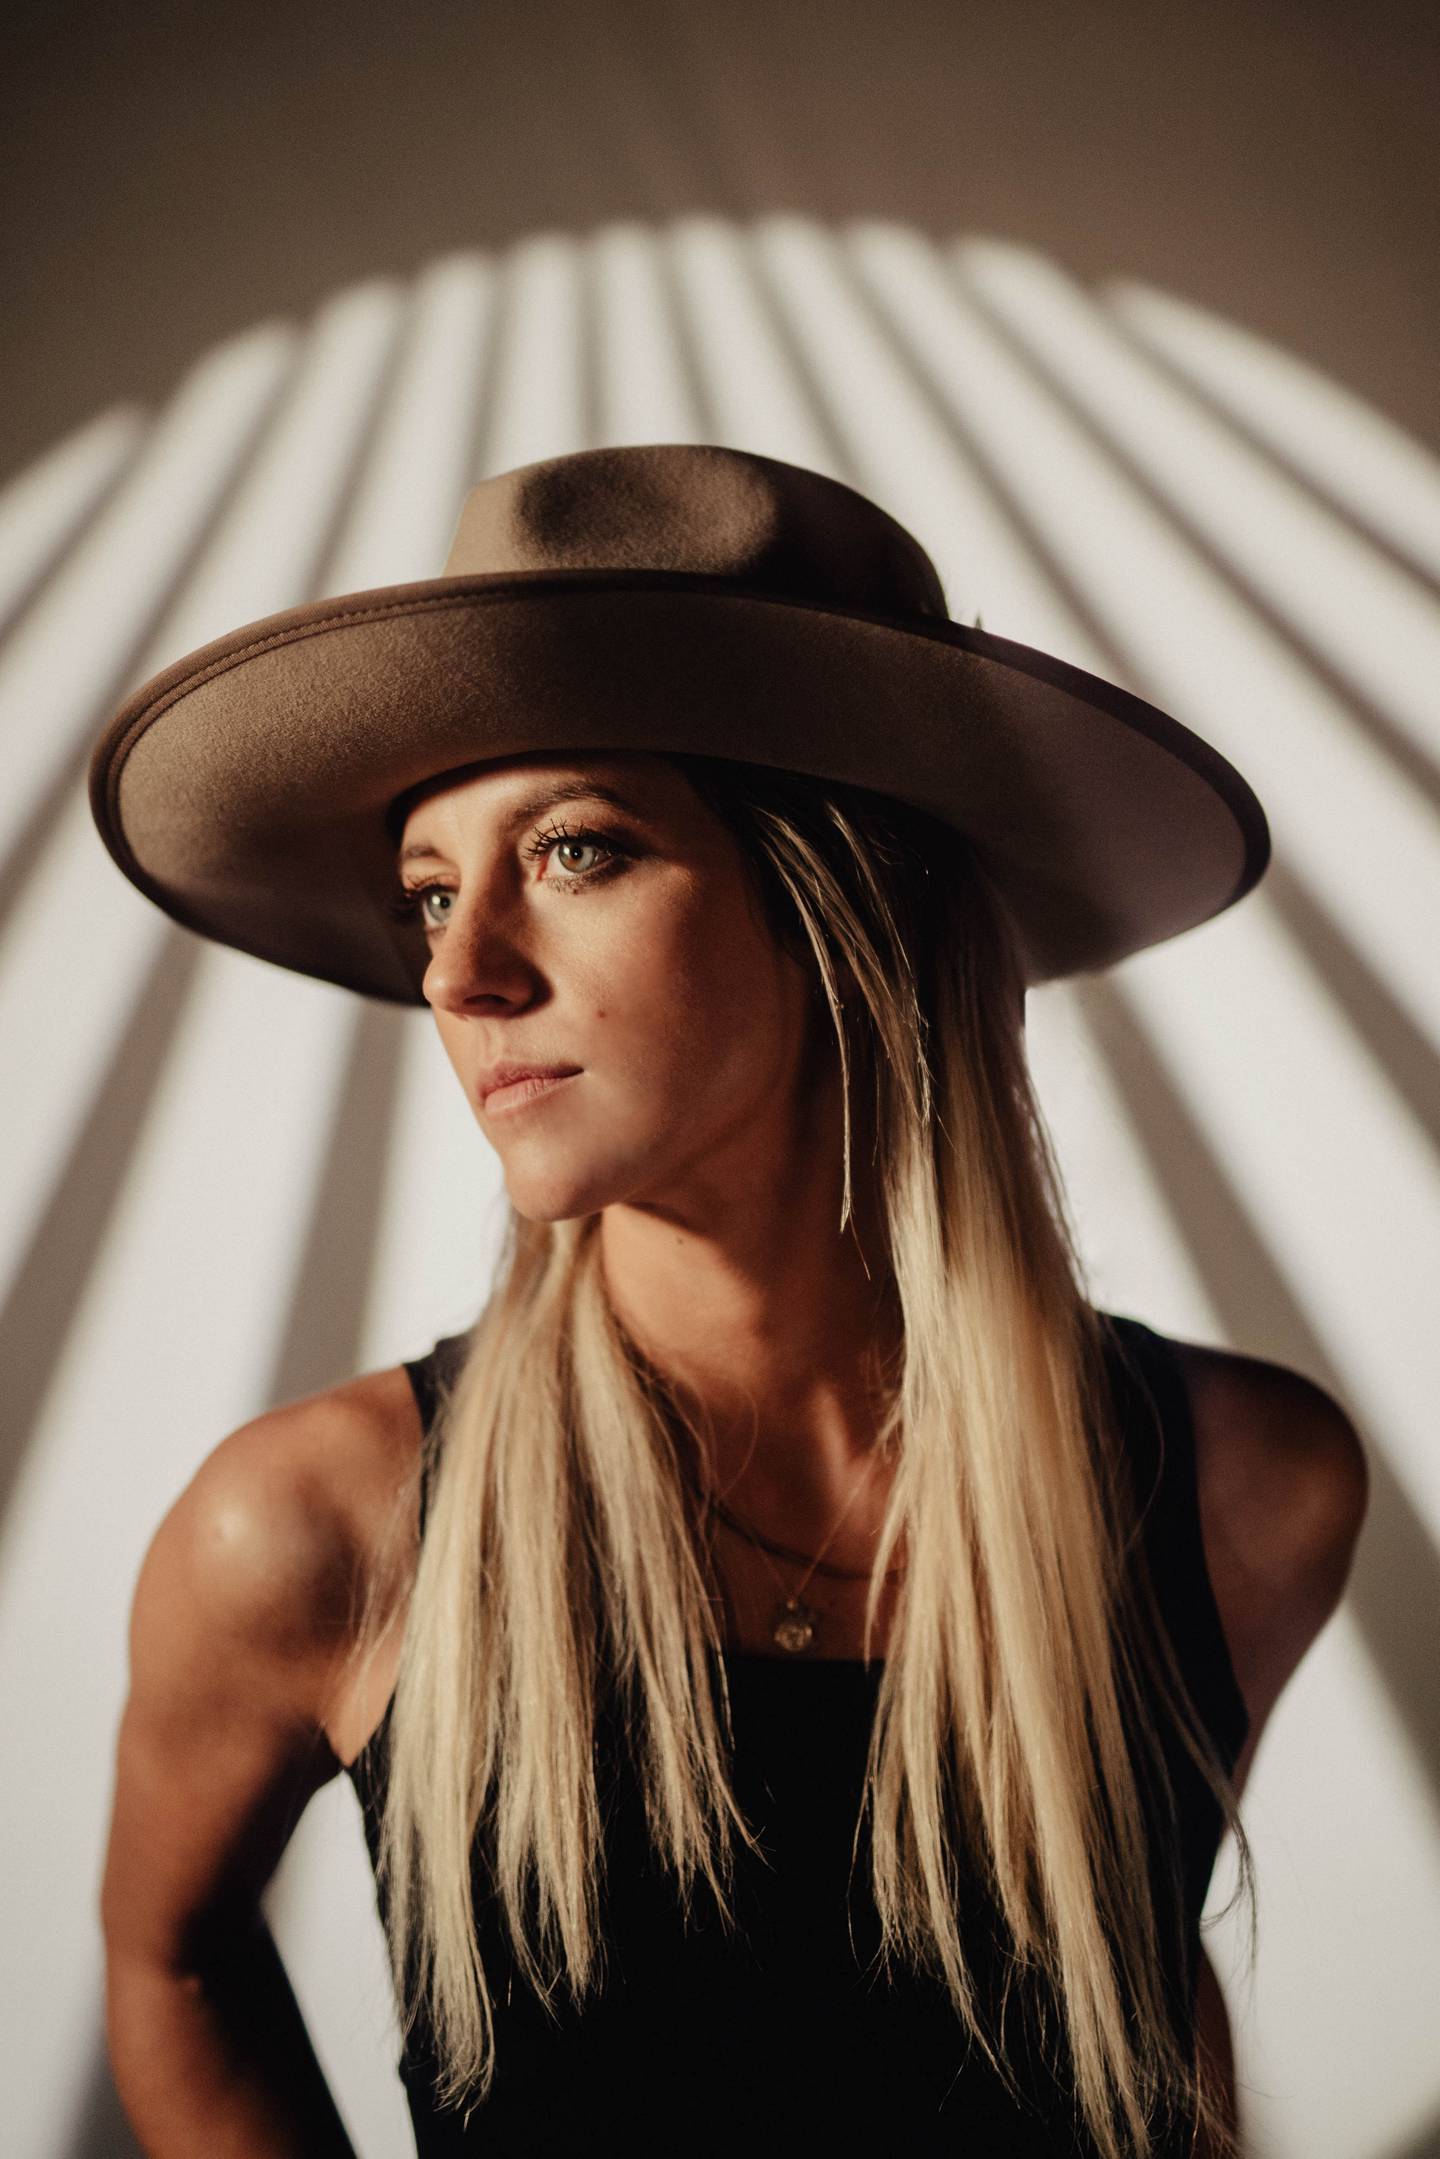 Gina Venier, a Dixon native, is finding her stride as a singer-songwriter in Nashville. Her single "Nora Jane" has been released to streaming platforms, accompanied by an interview with People magazine and a main stage performance at the Nashville Pride festival.